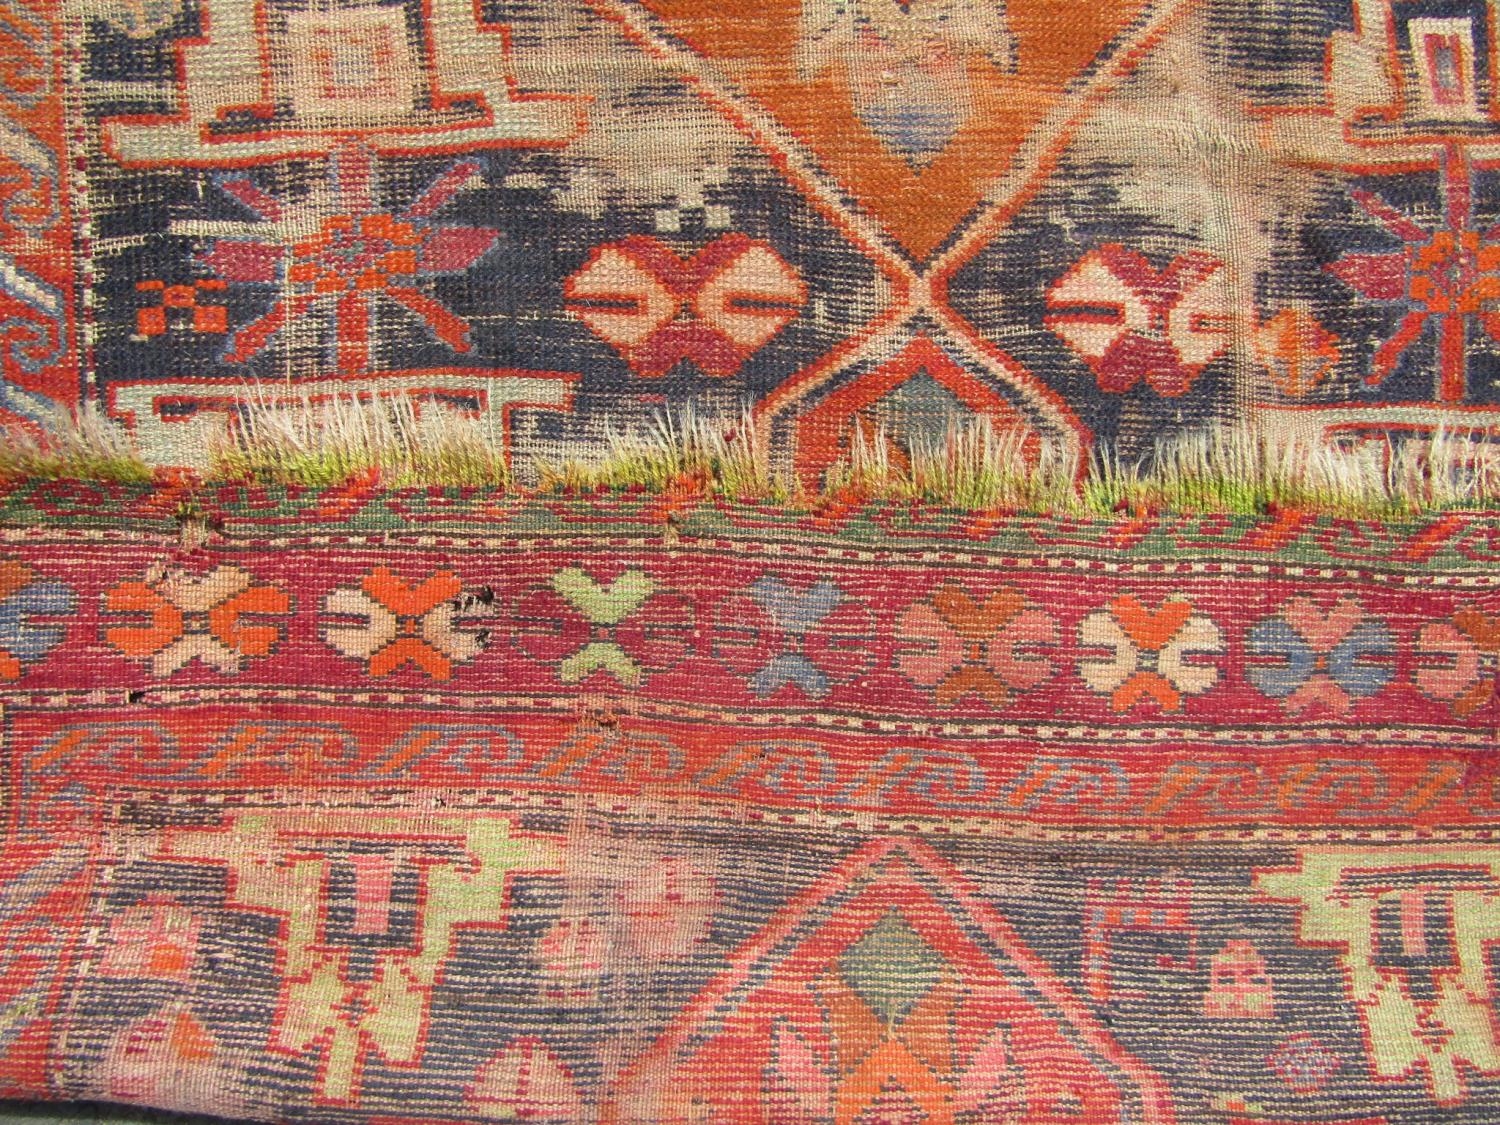 An old Persian rug with a central orange medallion,245cm x 120cm approx - Image 4 of 4